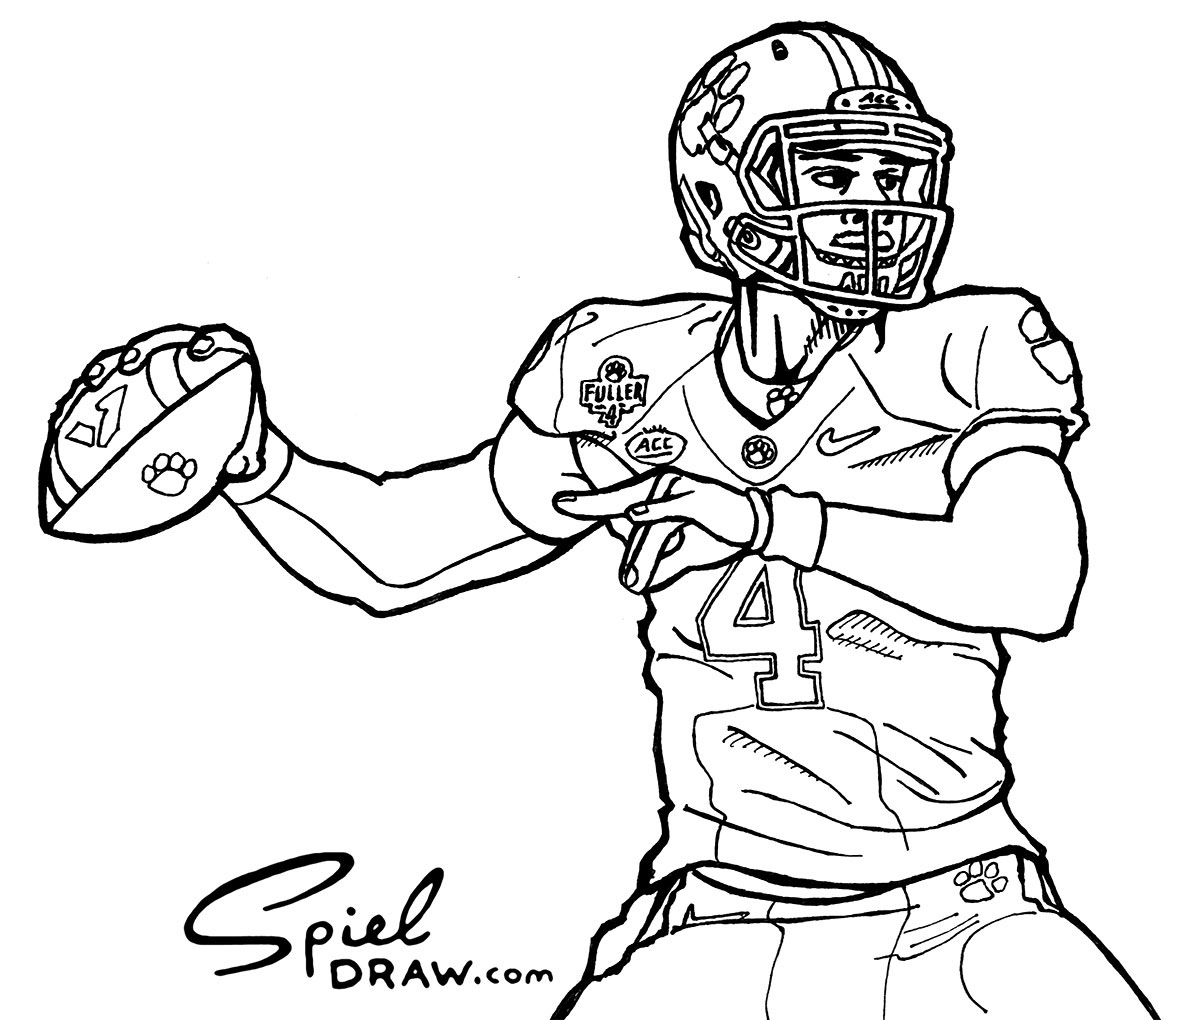 287 Cartoon College Football Coloring Pages with disney character